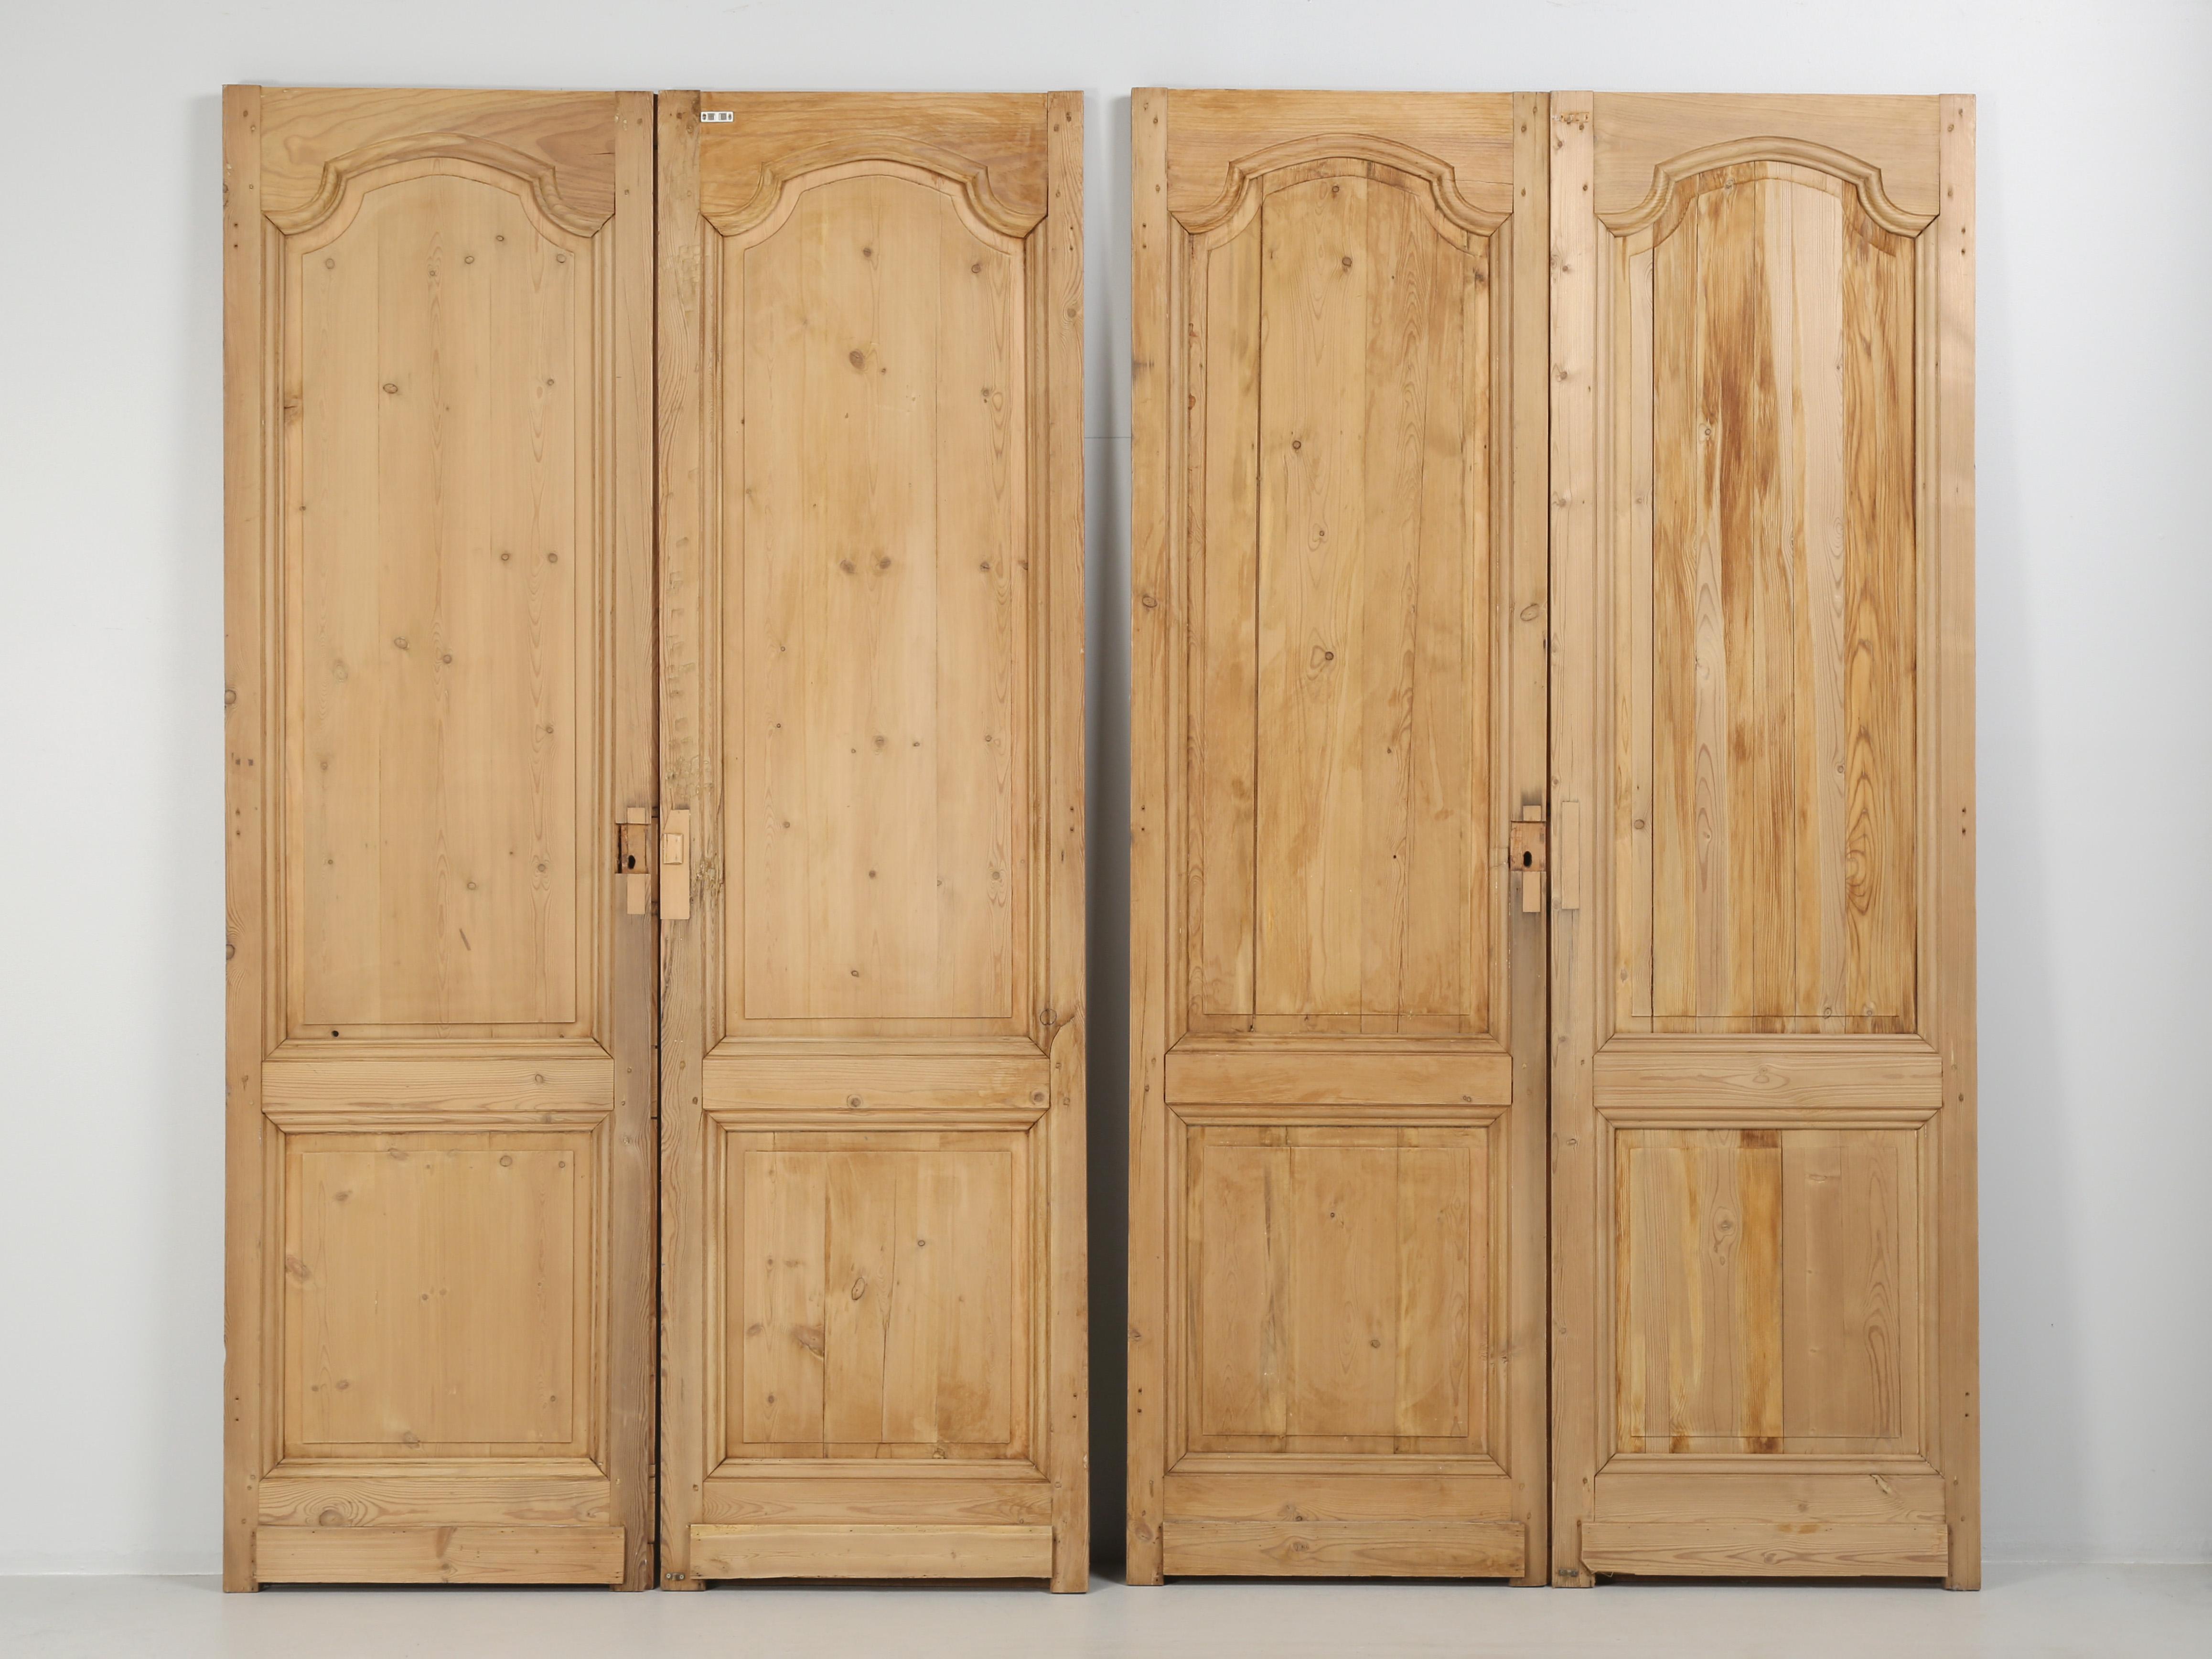 Antique '2' Pairs of French Doors From Toulouse Region Stripped to Raw Wood 8